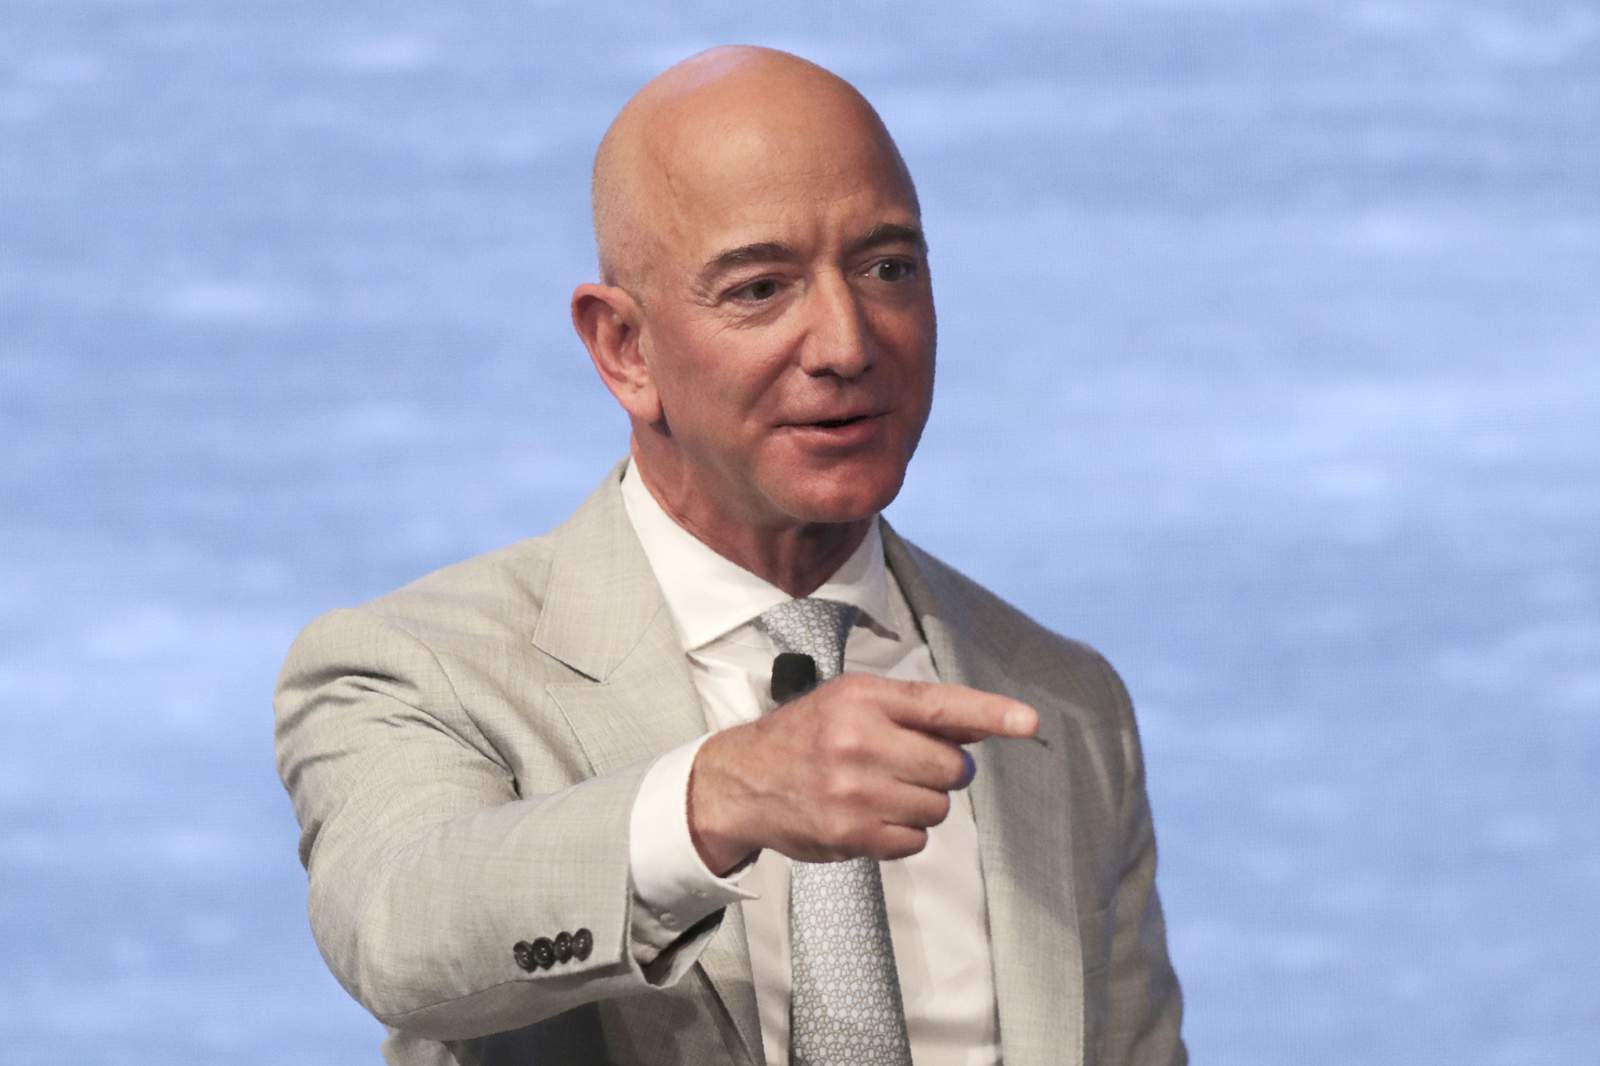 Bezos and Bloomberg among top 50 US charity donors for 2020